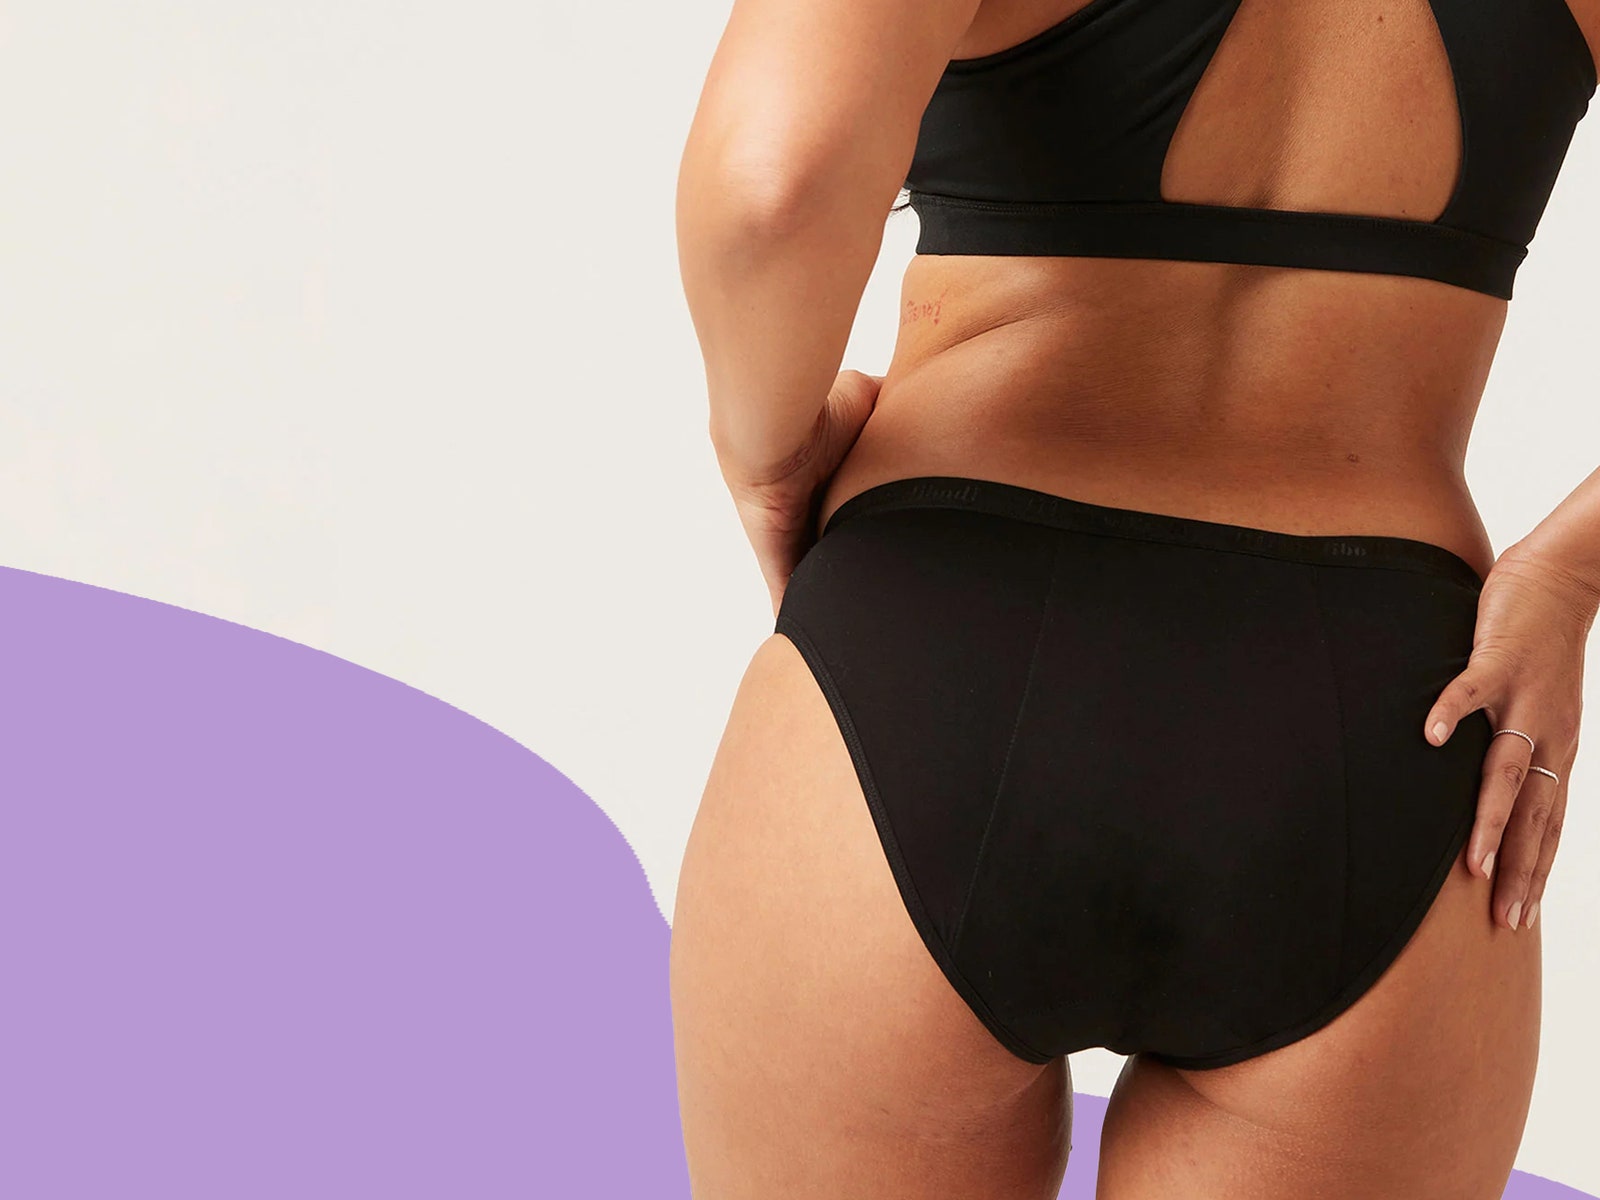 9 best incontinence pants that are discreet and comfortable